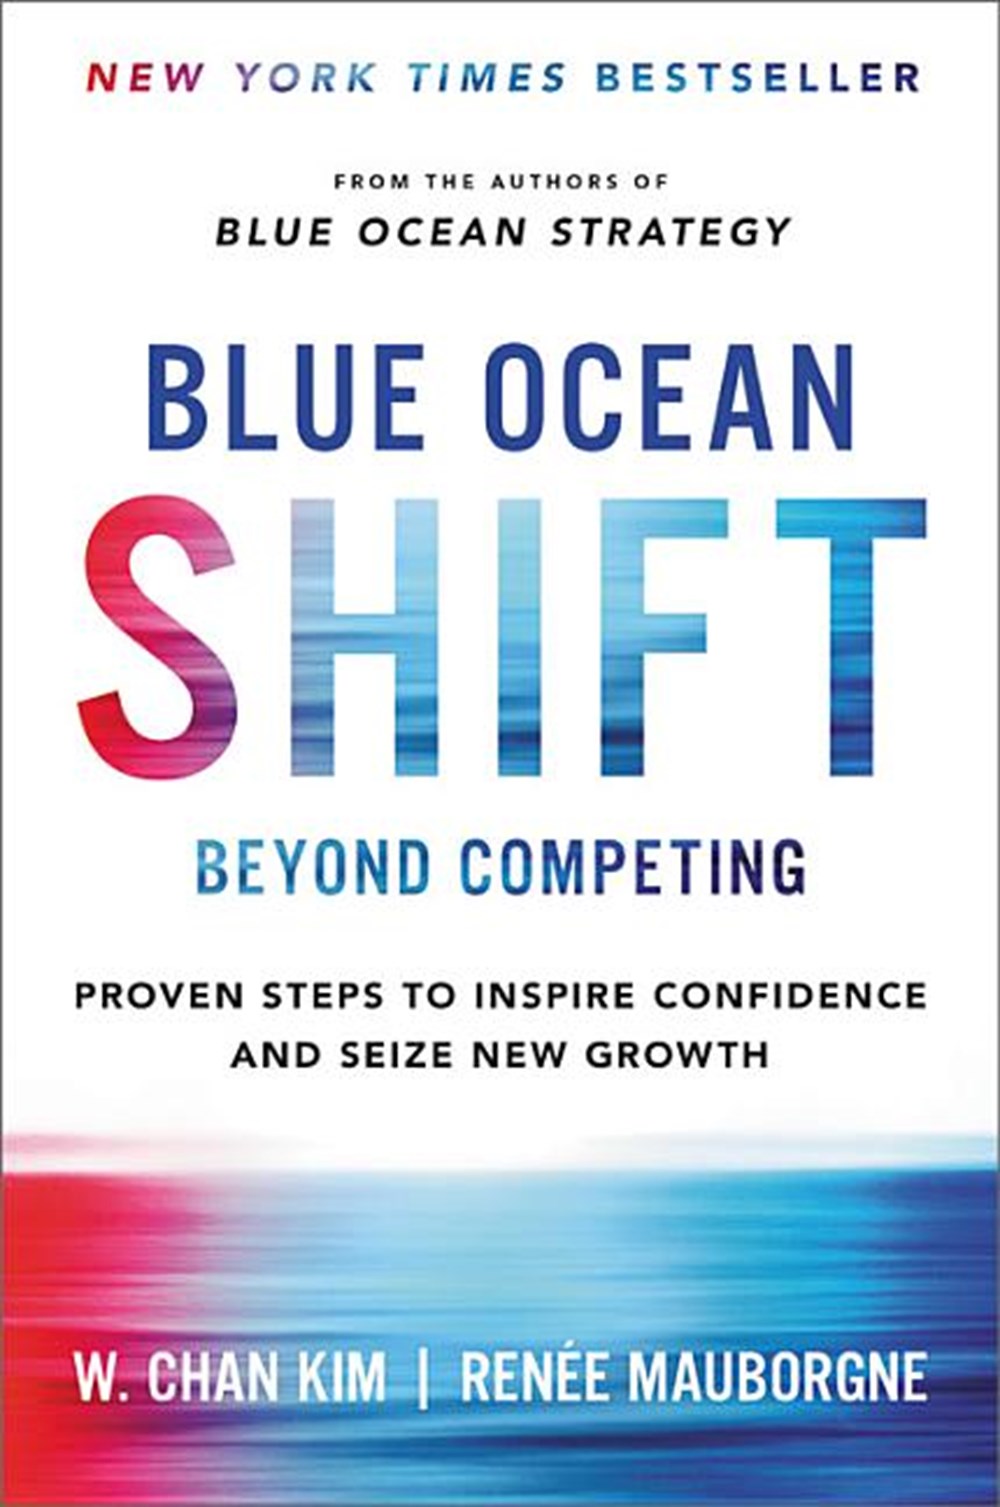 Blue Ocean Shift Beyond Competing - Proven Steps to Inspire Confidence and Seize New Growth